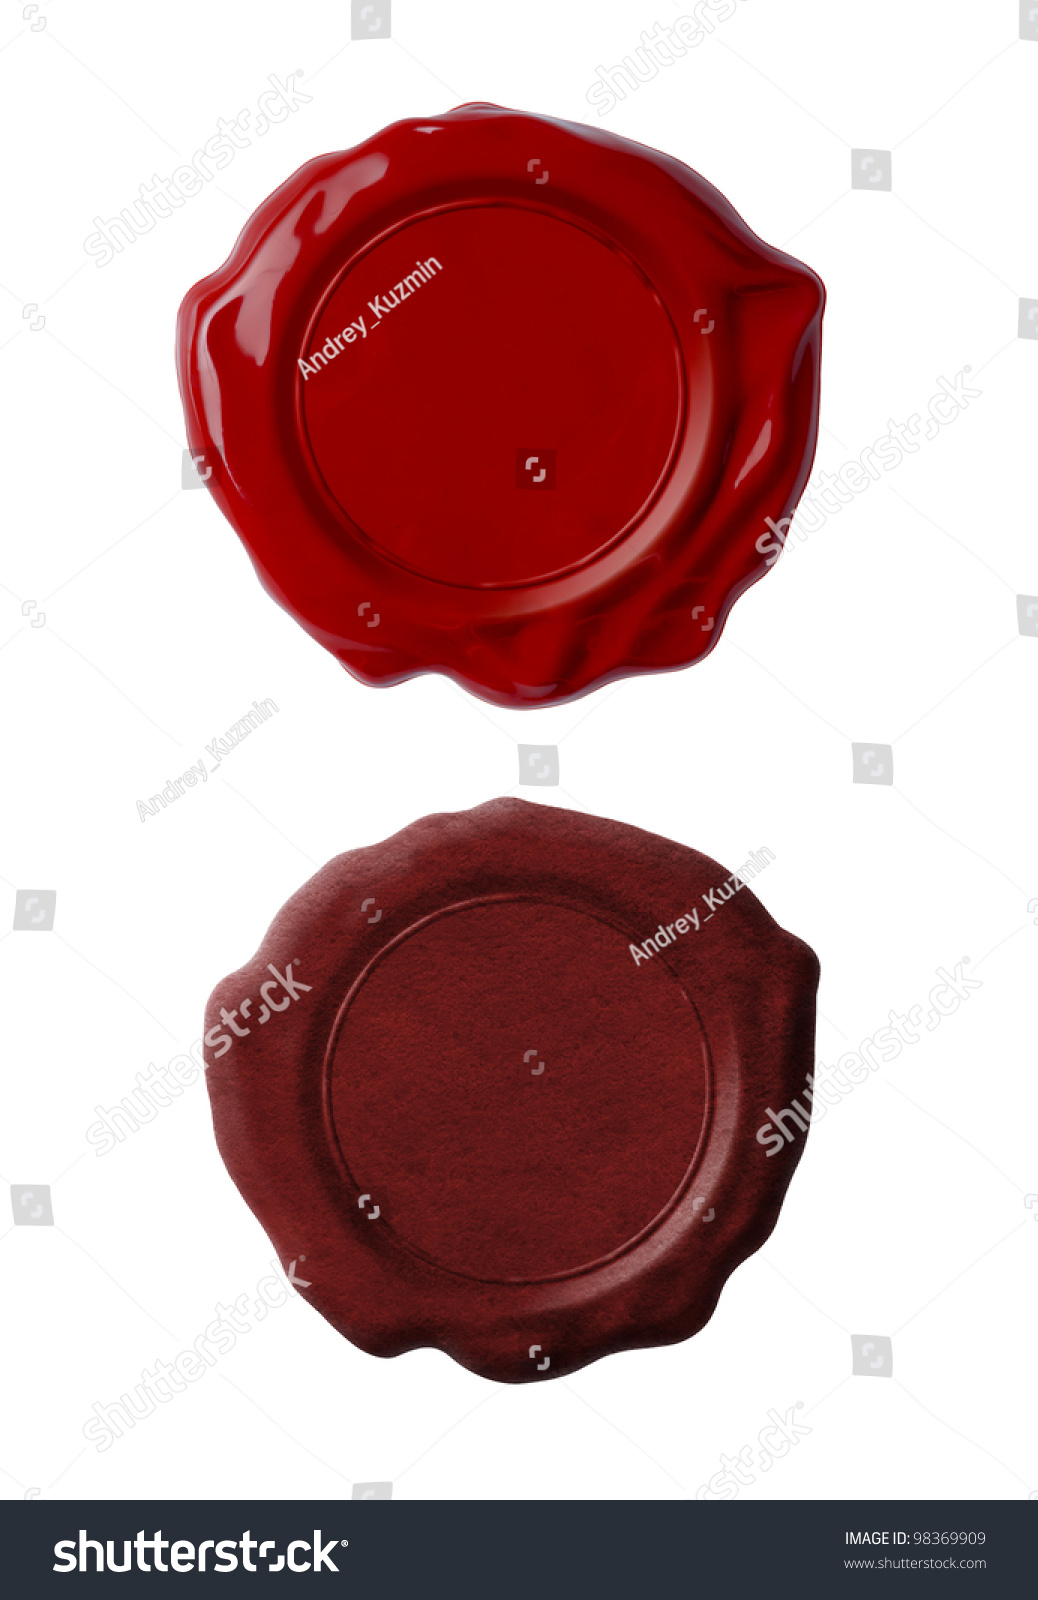 Red wax seals or signets set isolated on white #98369909